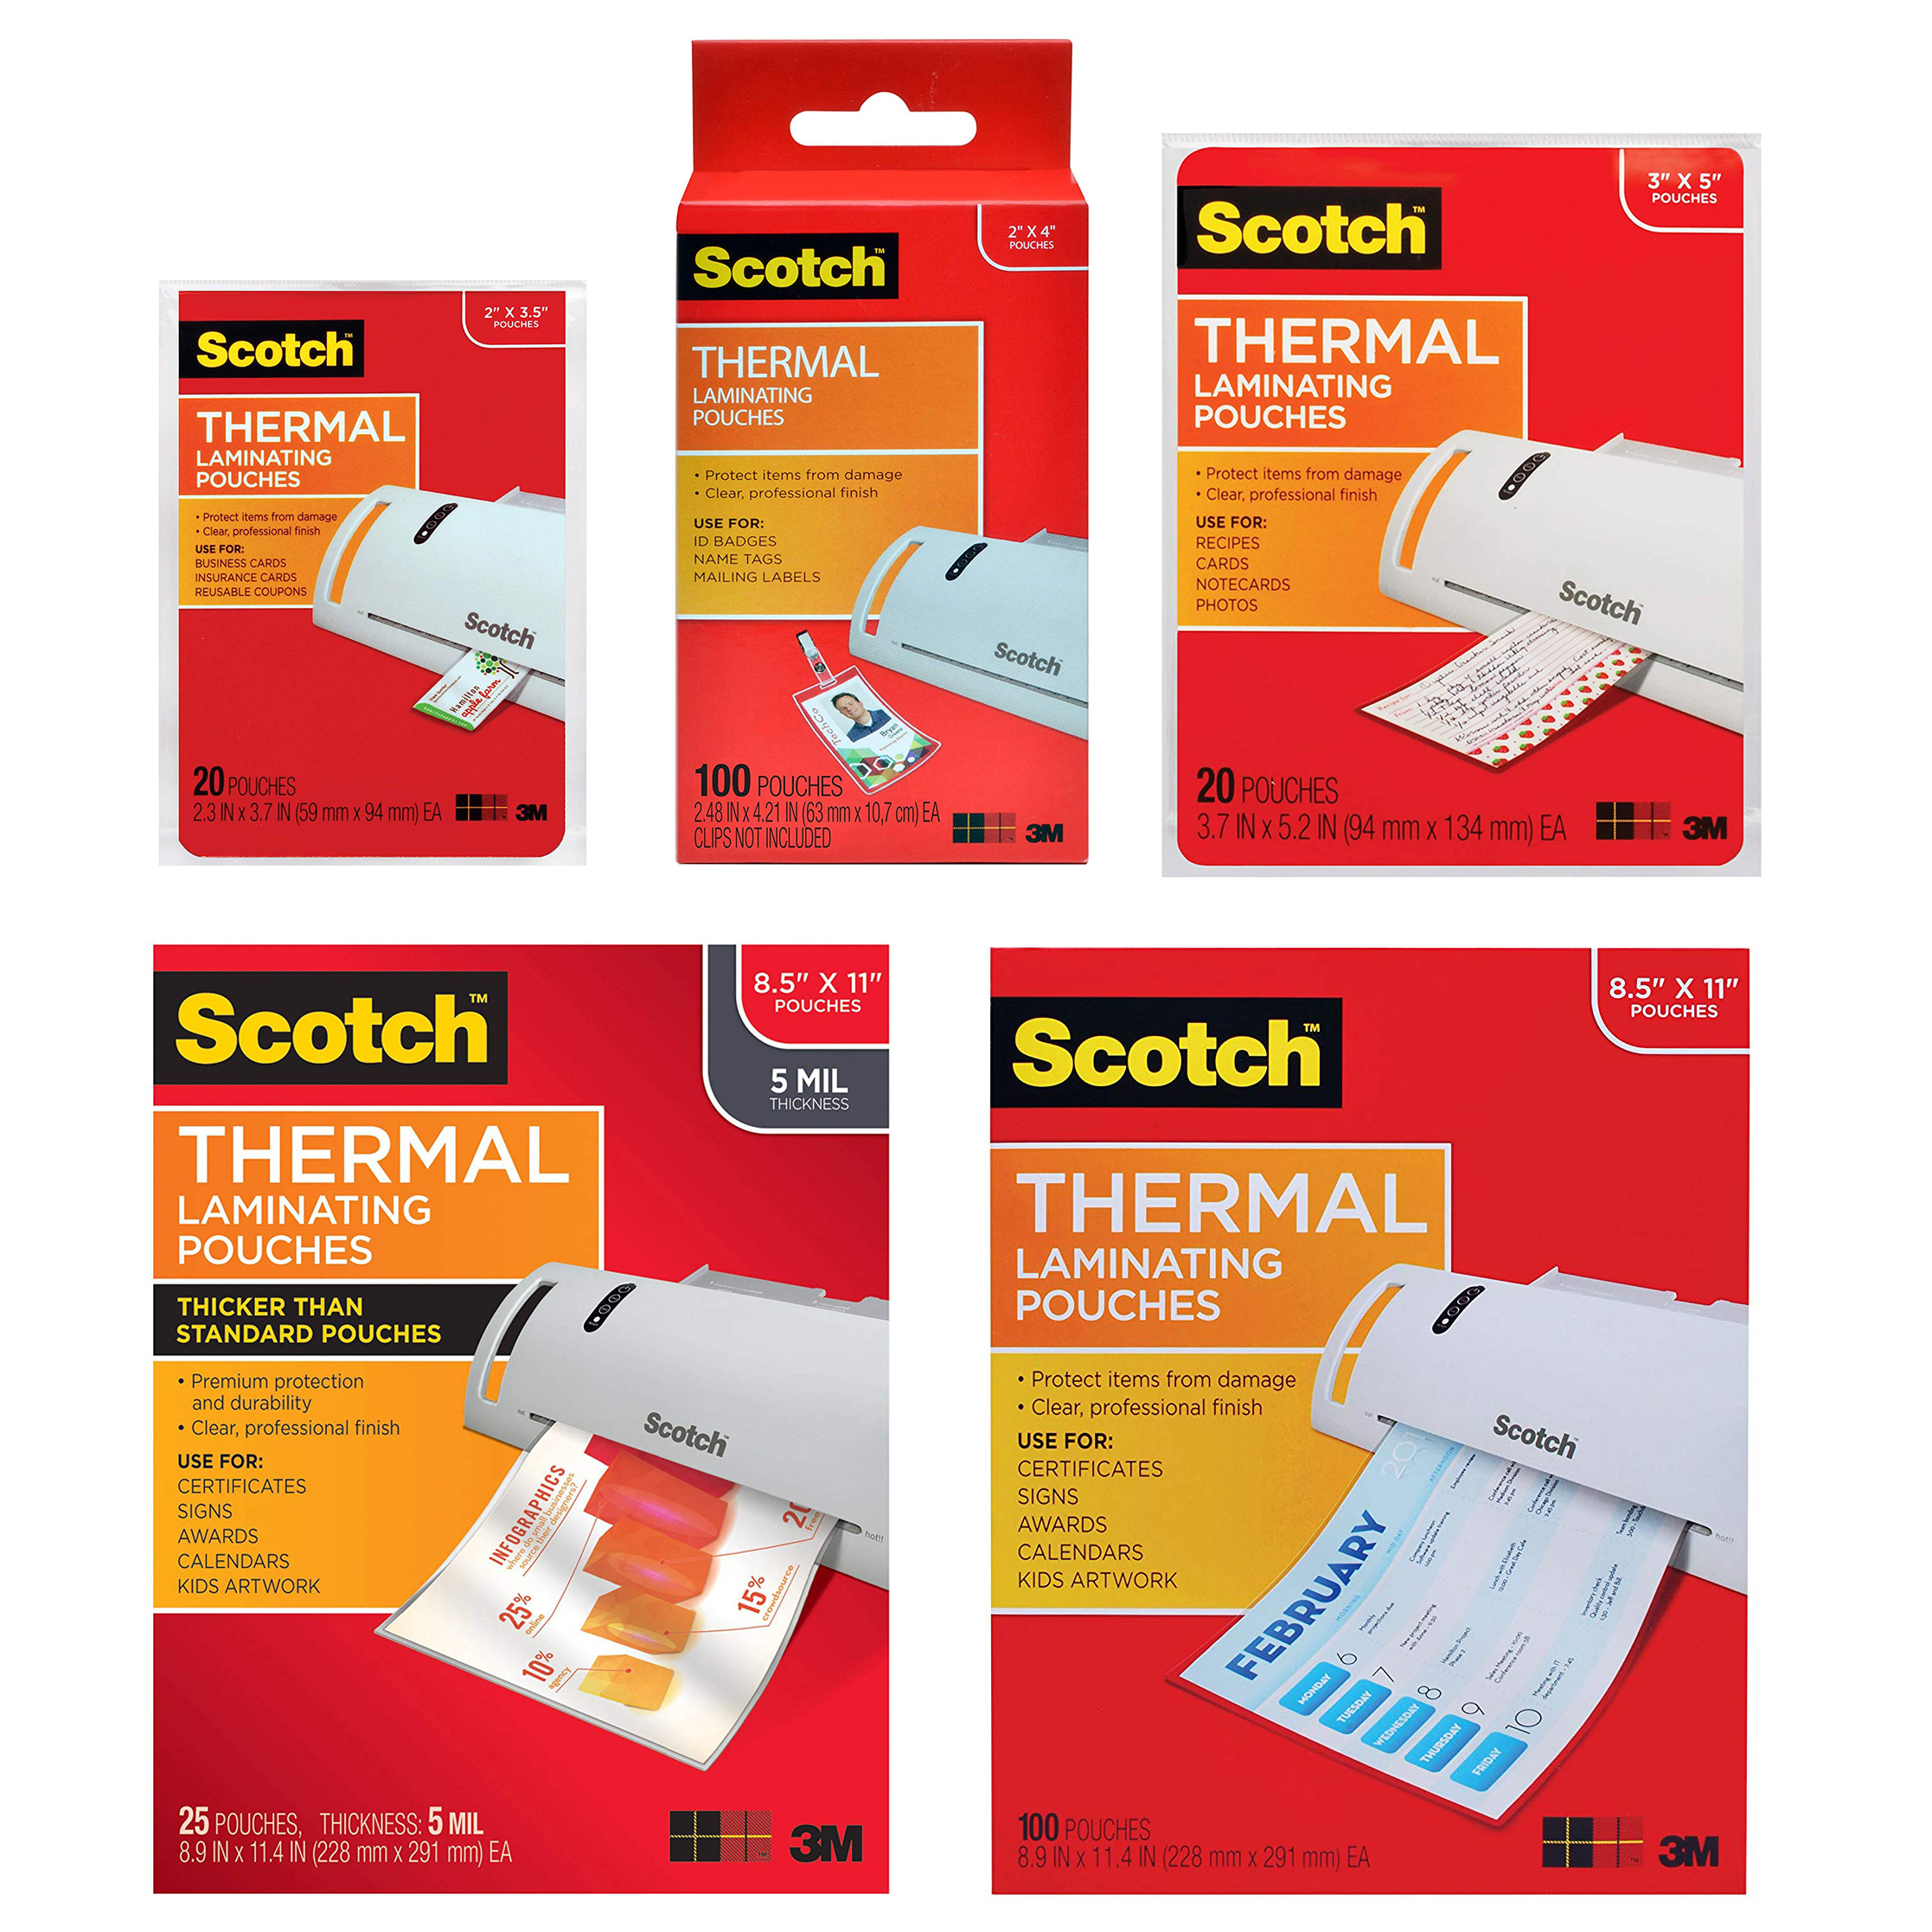 Scotch Thermal Laminating Pouches Improved Version.100Pack.New. 